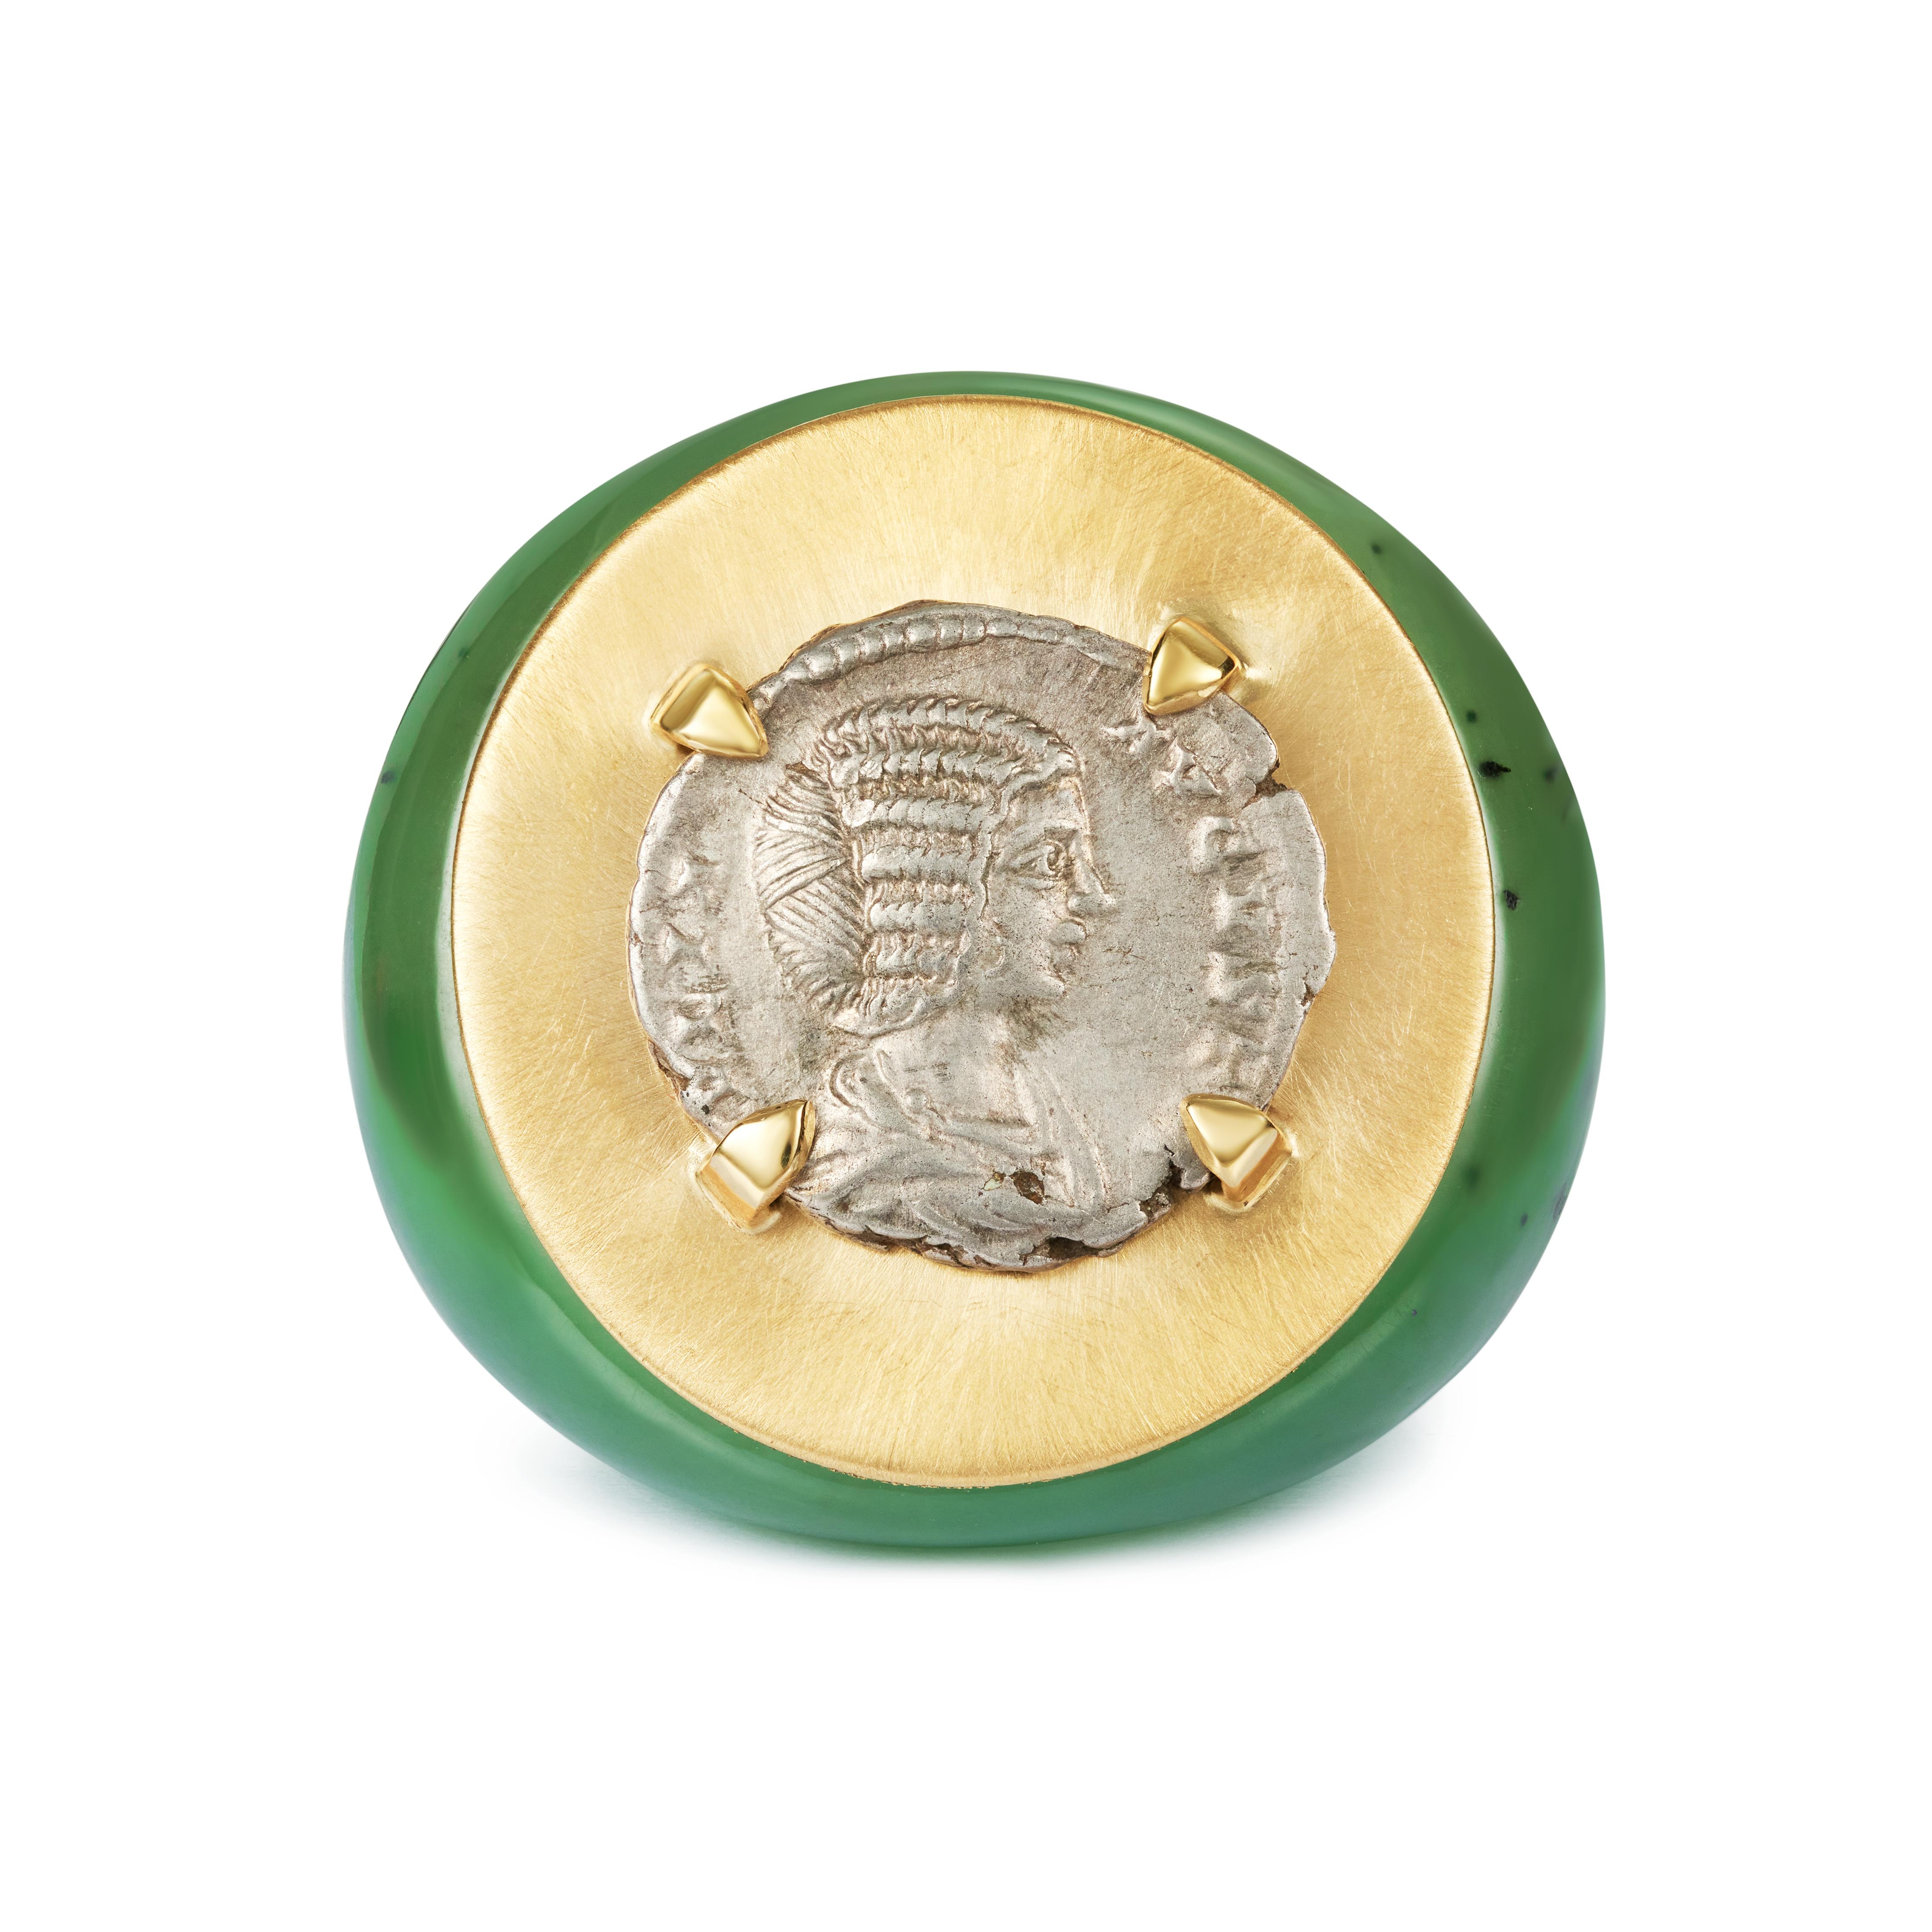 This DUBINI coin ring from the 'Empires' collection features a one-of-a-kind authentic roman silver denarius coin minted circa 200 A.D. set in 18kt brushed yellow gold and apple jade base ring.

Depicted on the Coin

Obverse: Julia Domna AR